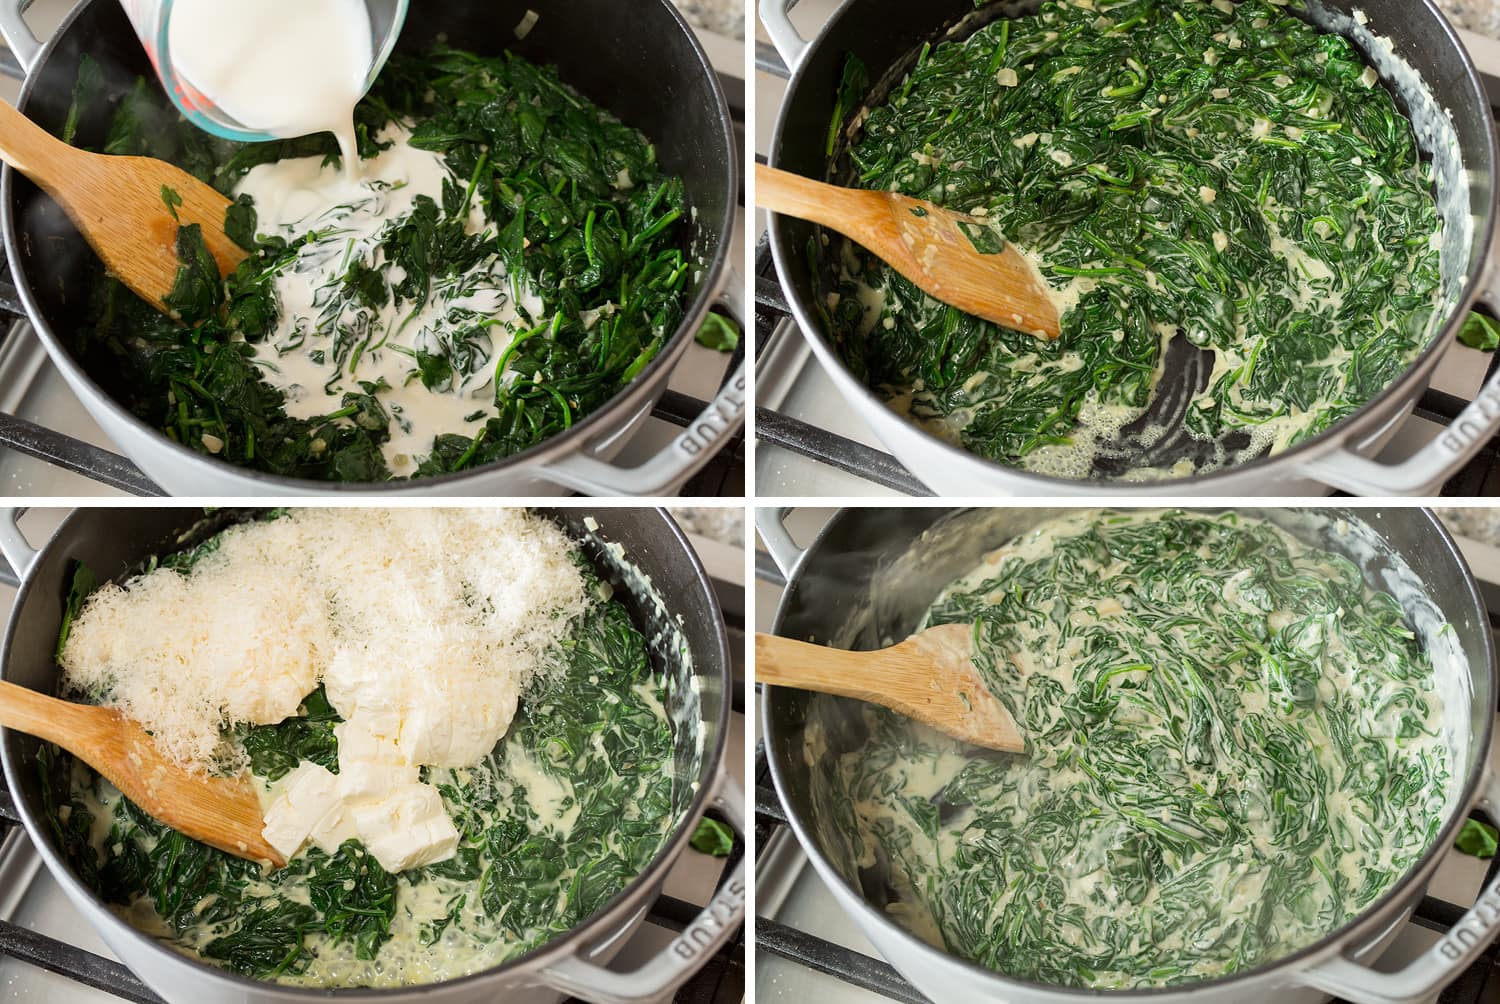 Continued photos showing how to make creamed spinach with cream, cream cheese an parmesan.